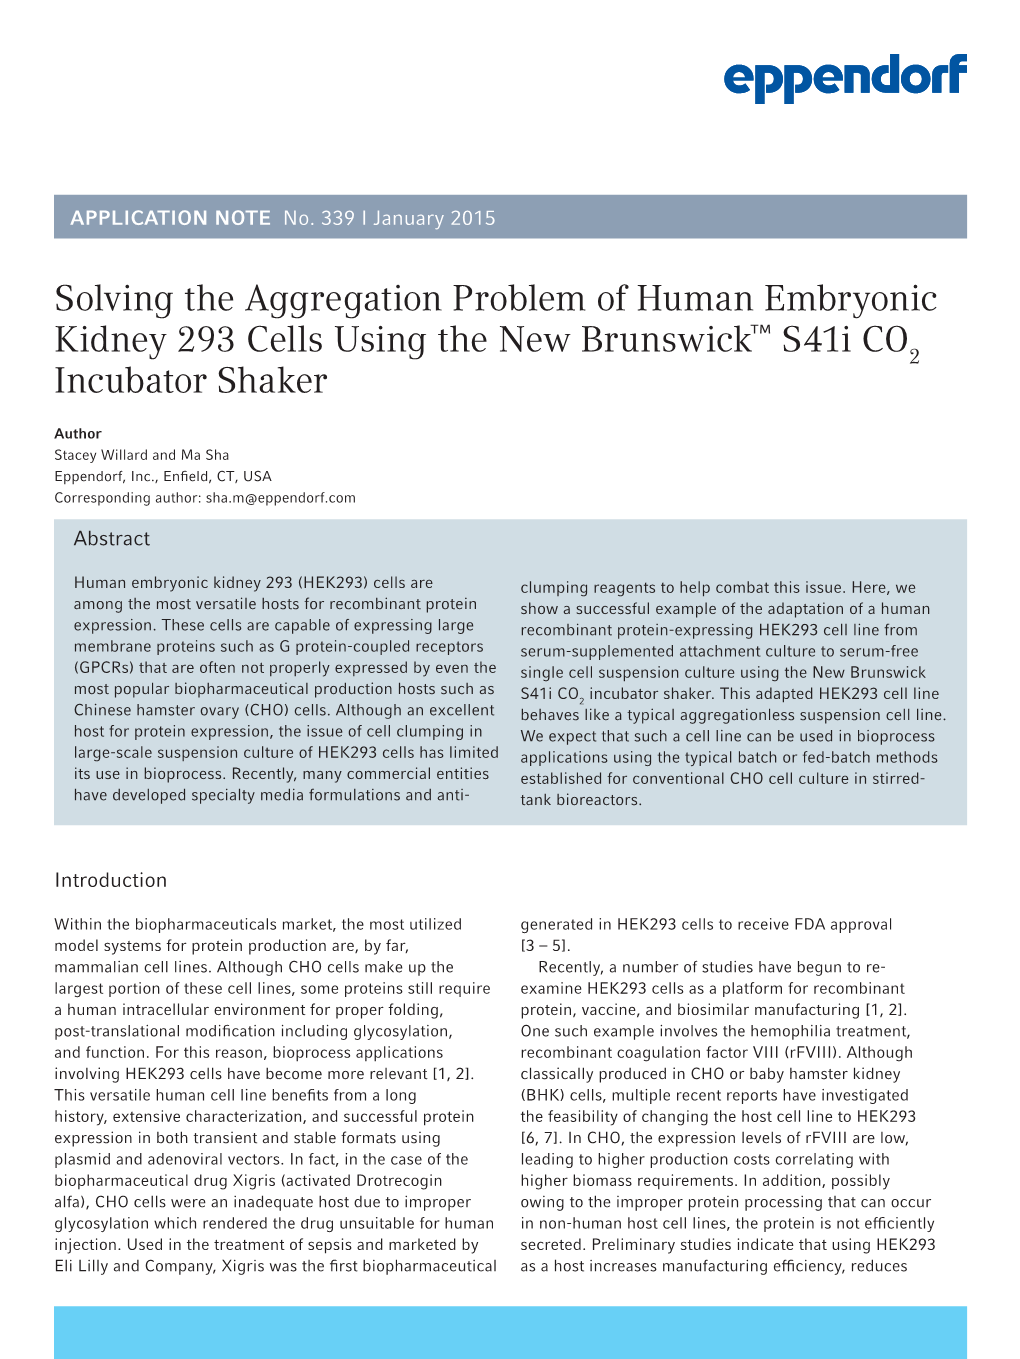 Solving the Aggregation Problem of Human Embryonic Kidney 293